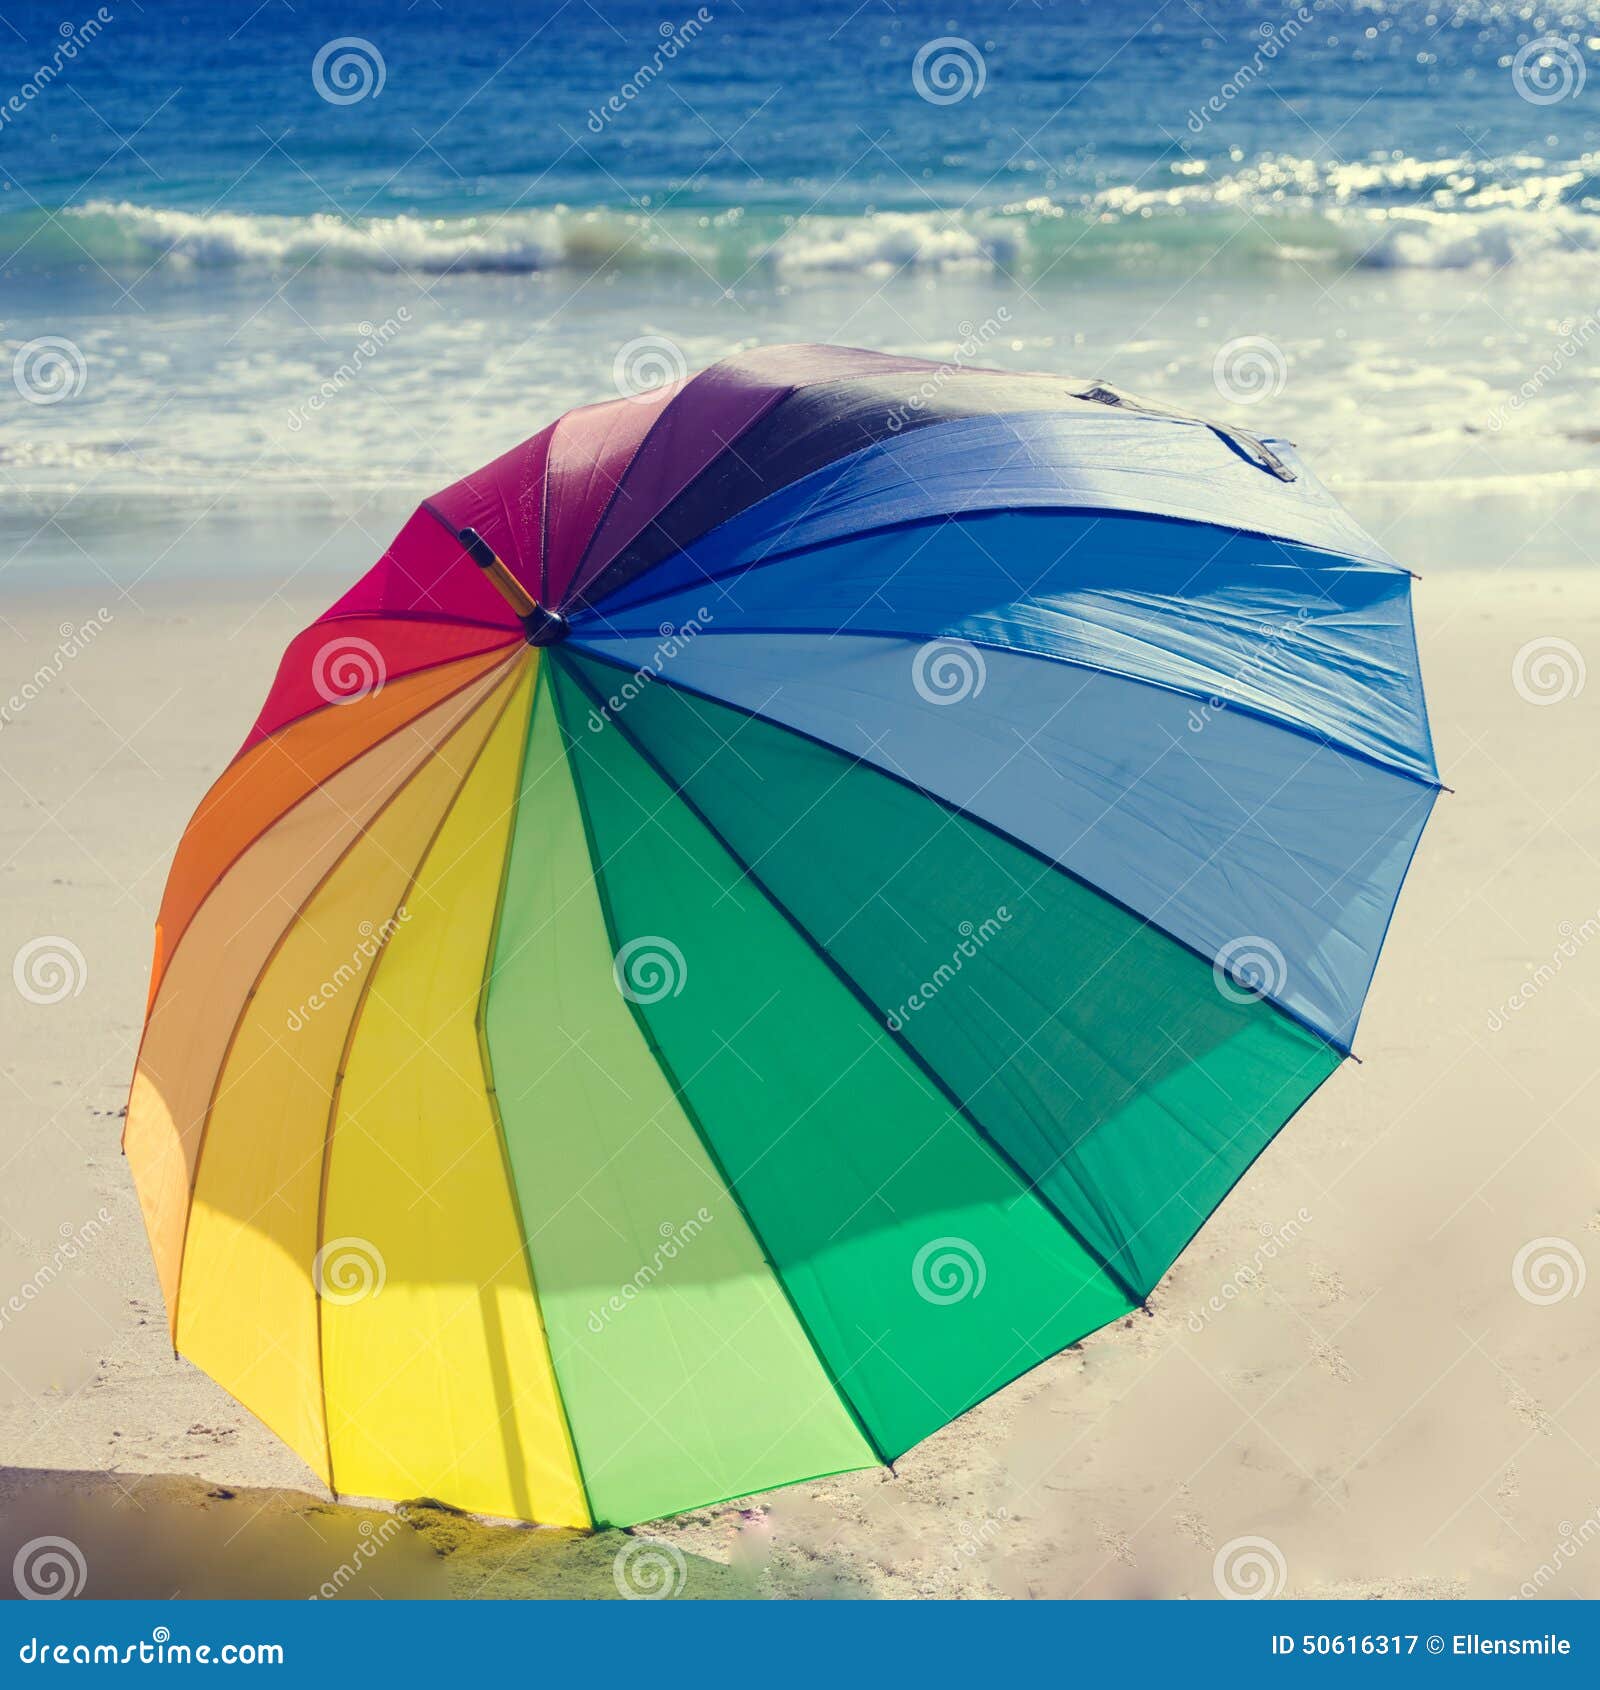 Rainbow Umbrella by the Ocean Stock Image - Image of resort, relaxation ...